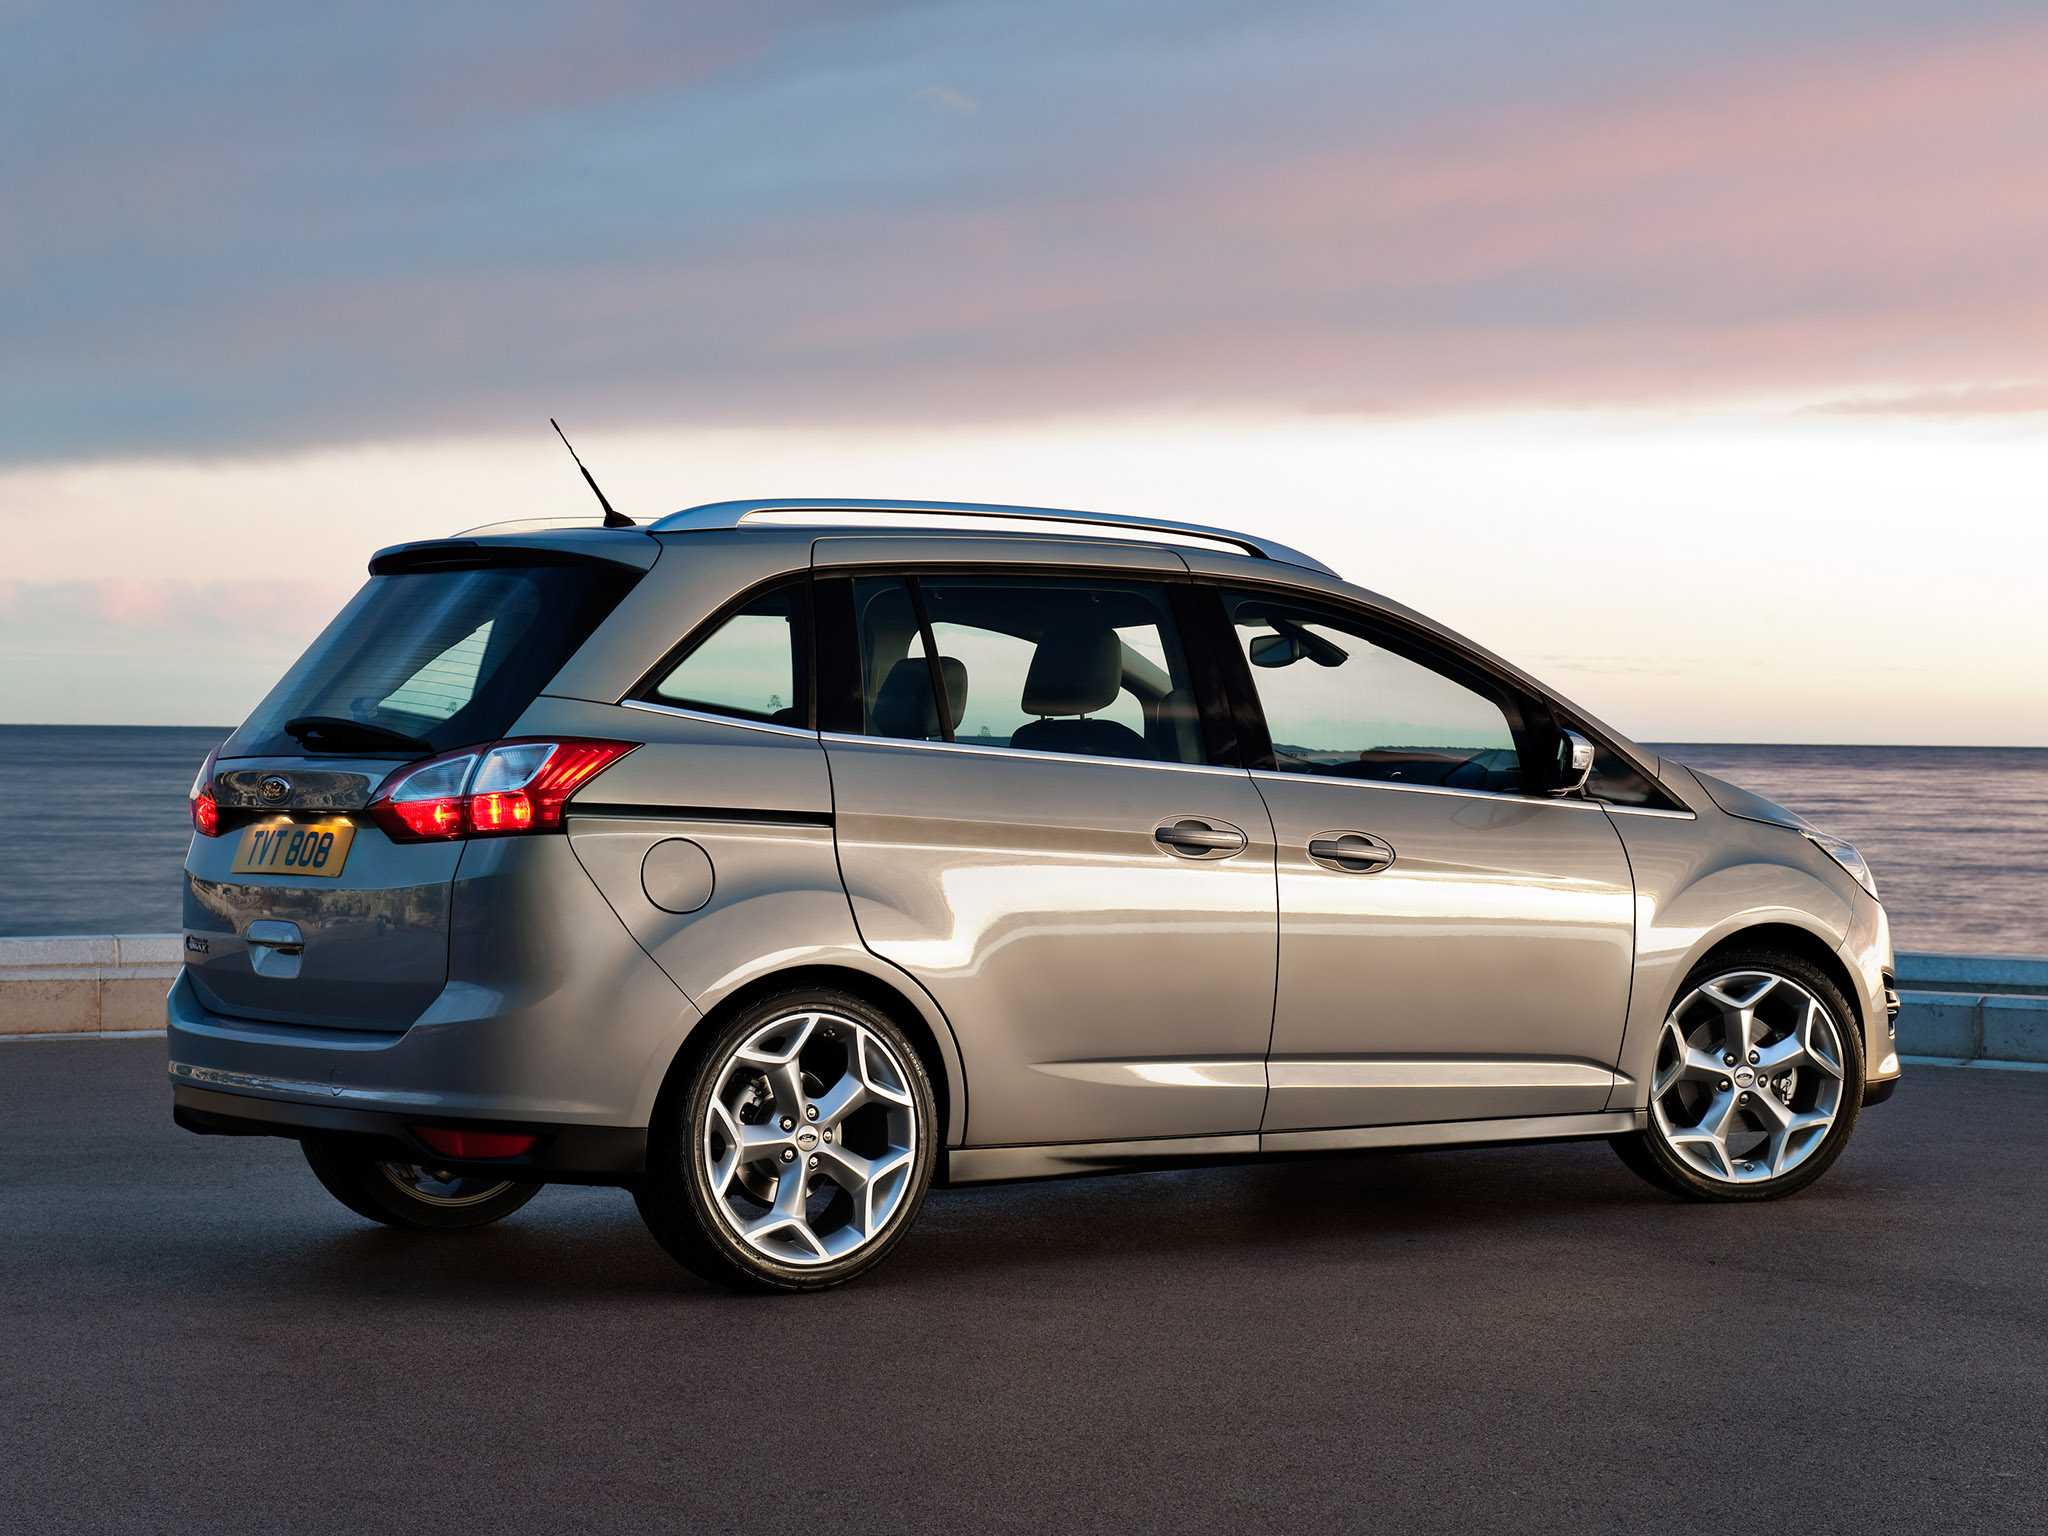 Car in pictures car photo gallery » Ford Grand CMAX